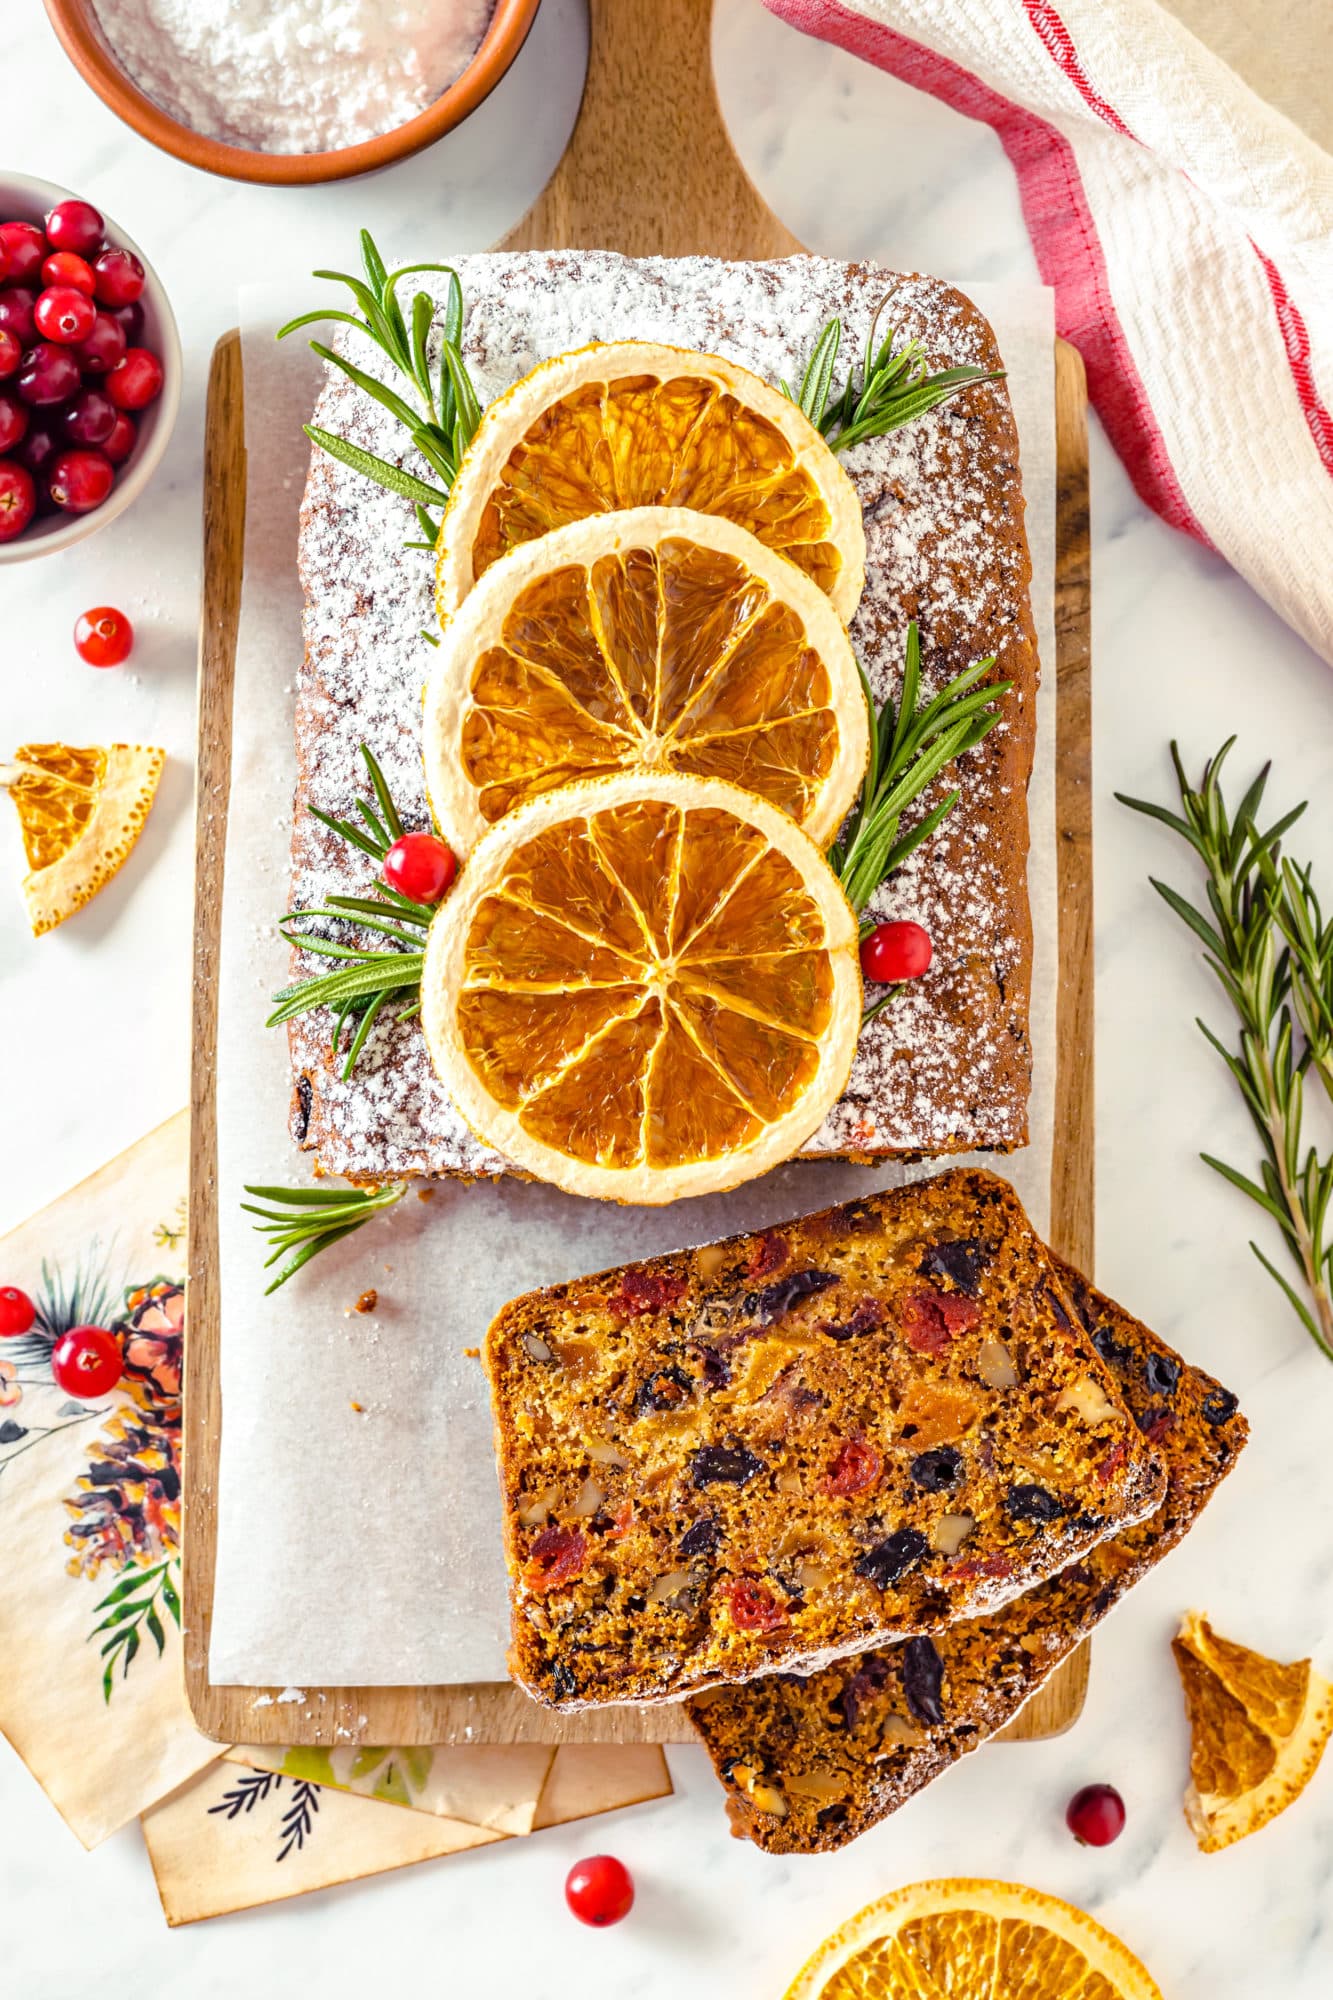 top view of a sliced fruit cake with toppings on top of the cake and more on the side including cranberries rosemary sprigs and some slices of candied orange.